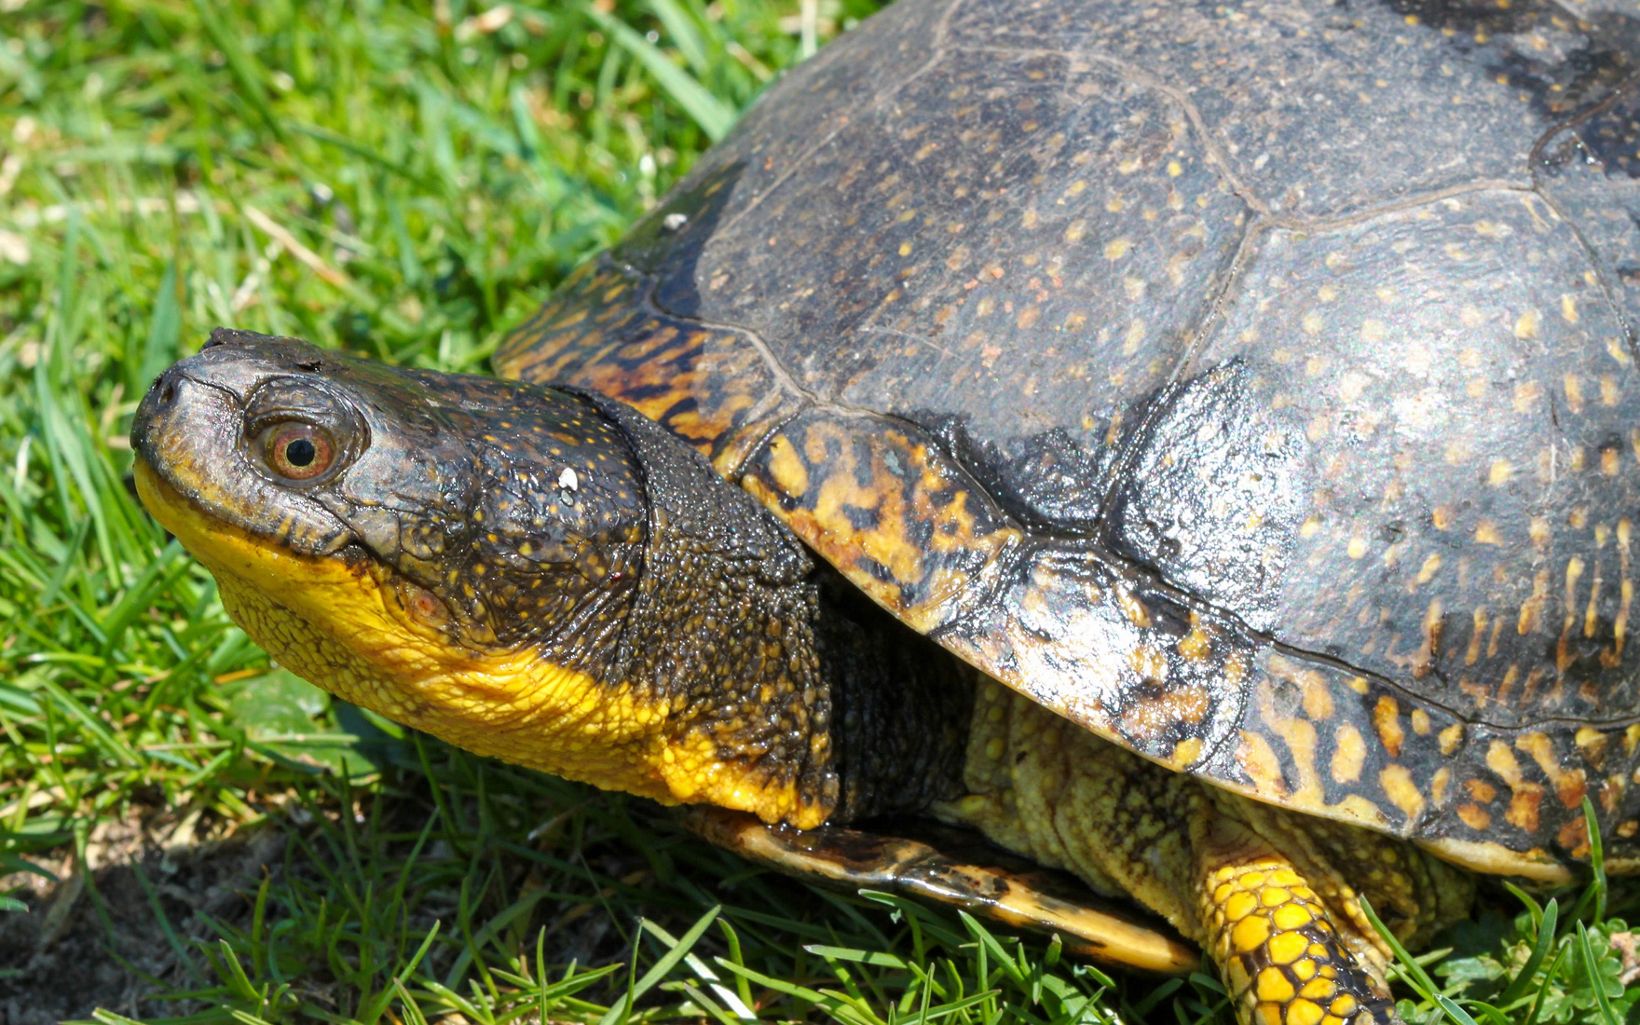 A turtle's head with a bright yellow neck and the front part of it's shell takes up the frame of the photo.